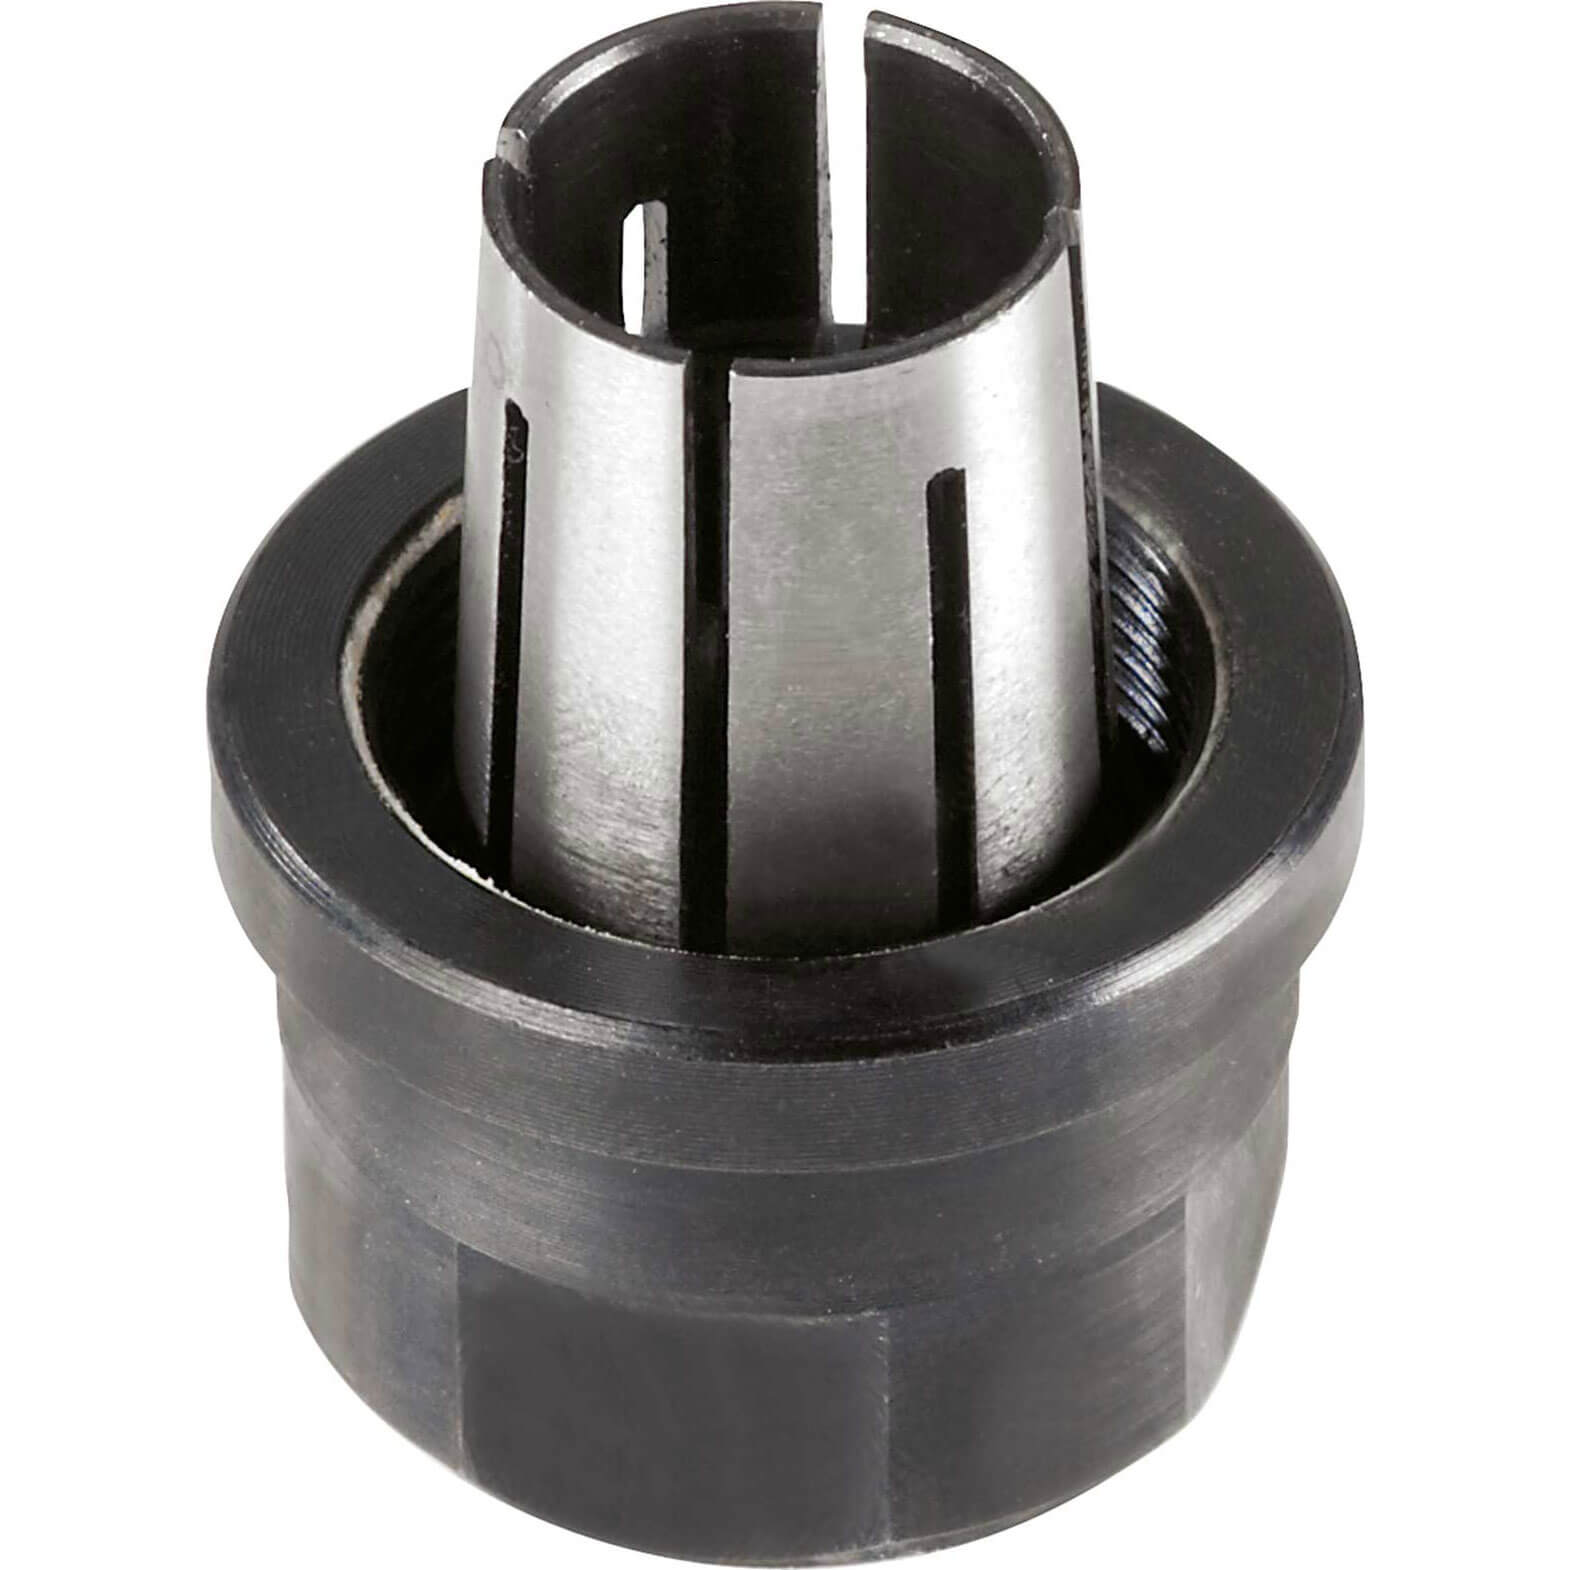 Image of Festool Router Collet For Festool Router OF2200 8mm